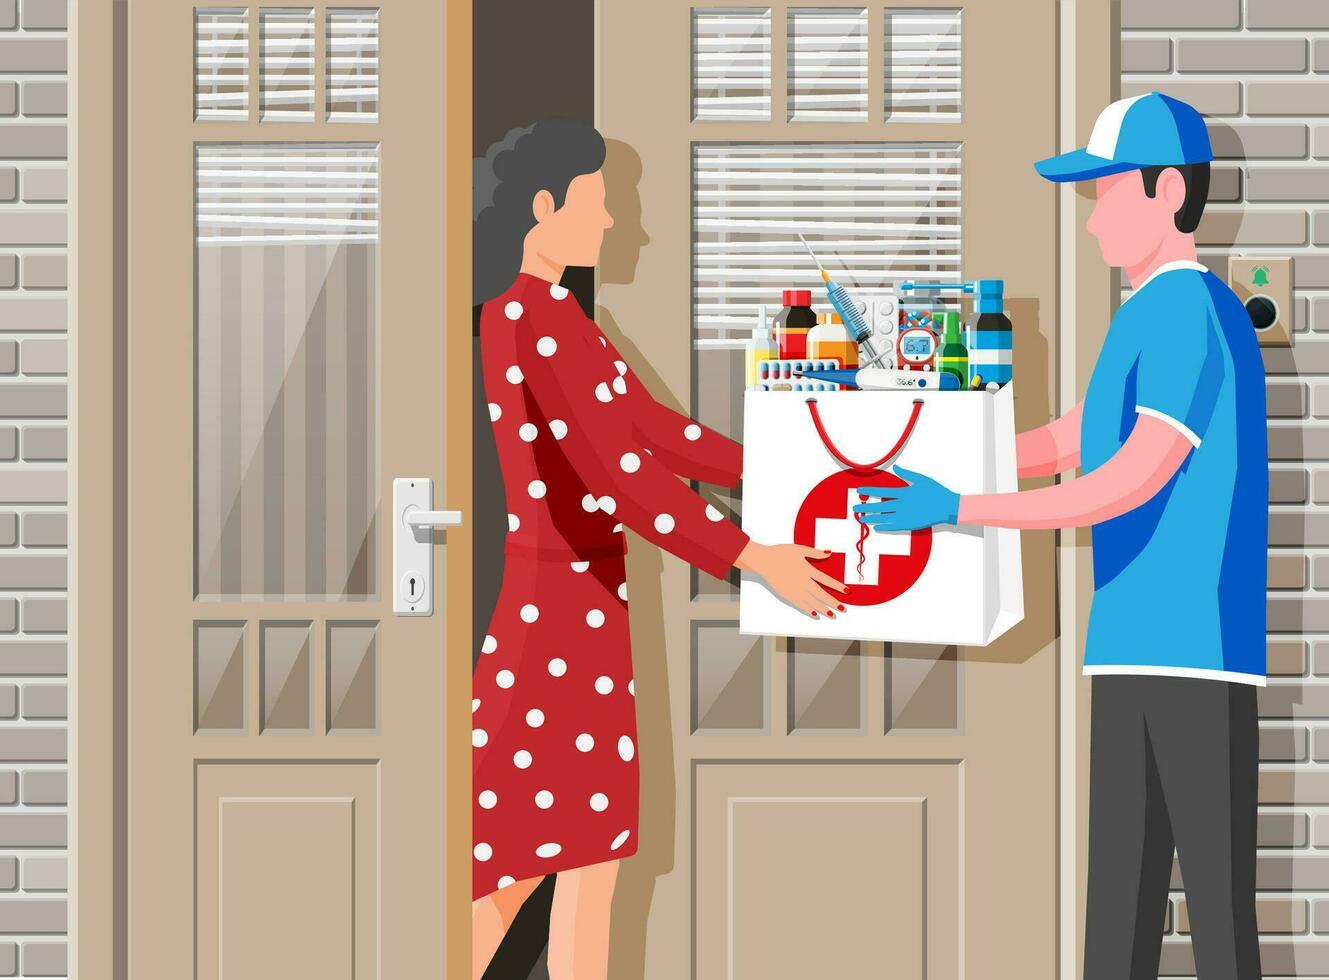 Courier delivered package of drugs to customer. Pharmacy delivery service concept. Delivery man give ordered medical products to woman. Online drugstore or internet shop. Flat vector illustration